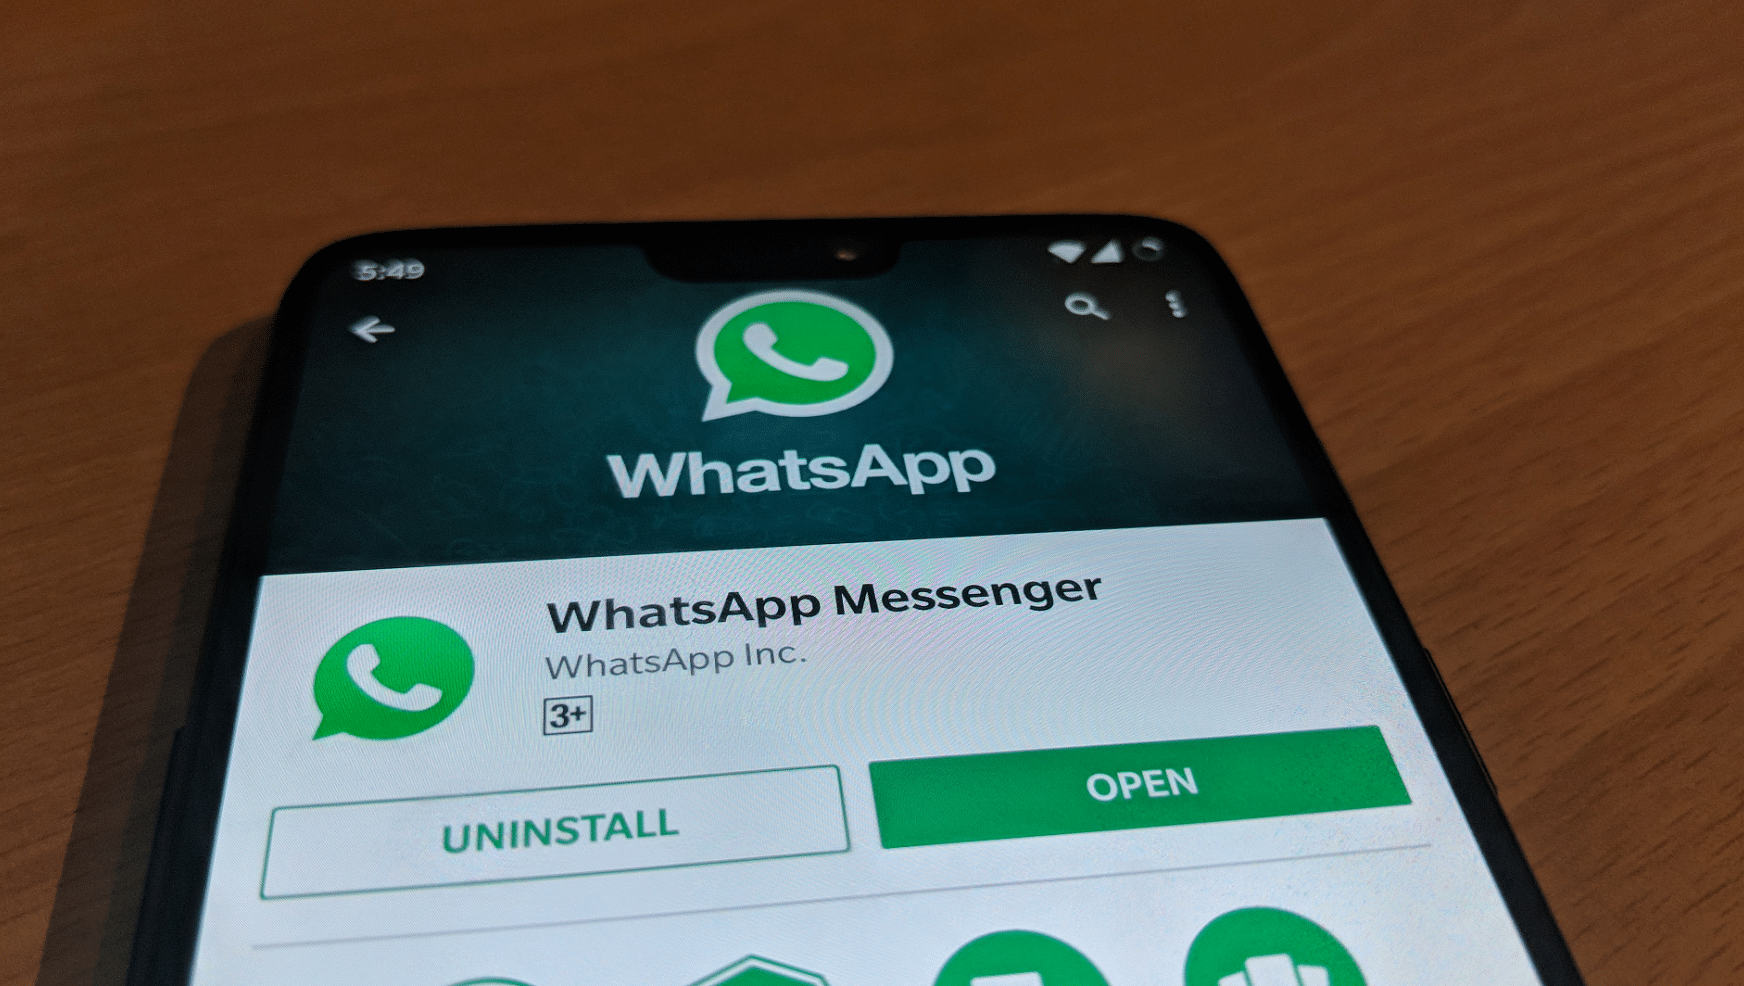 WhatsApp will take legal action against violators from 7 December, who engage in bulk or automated messages.